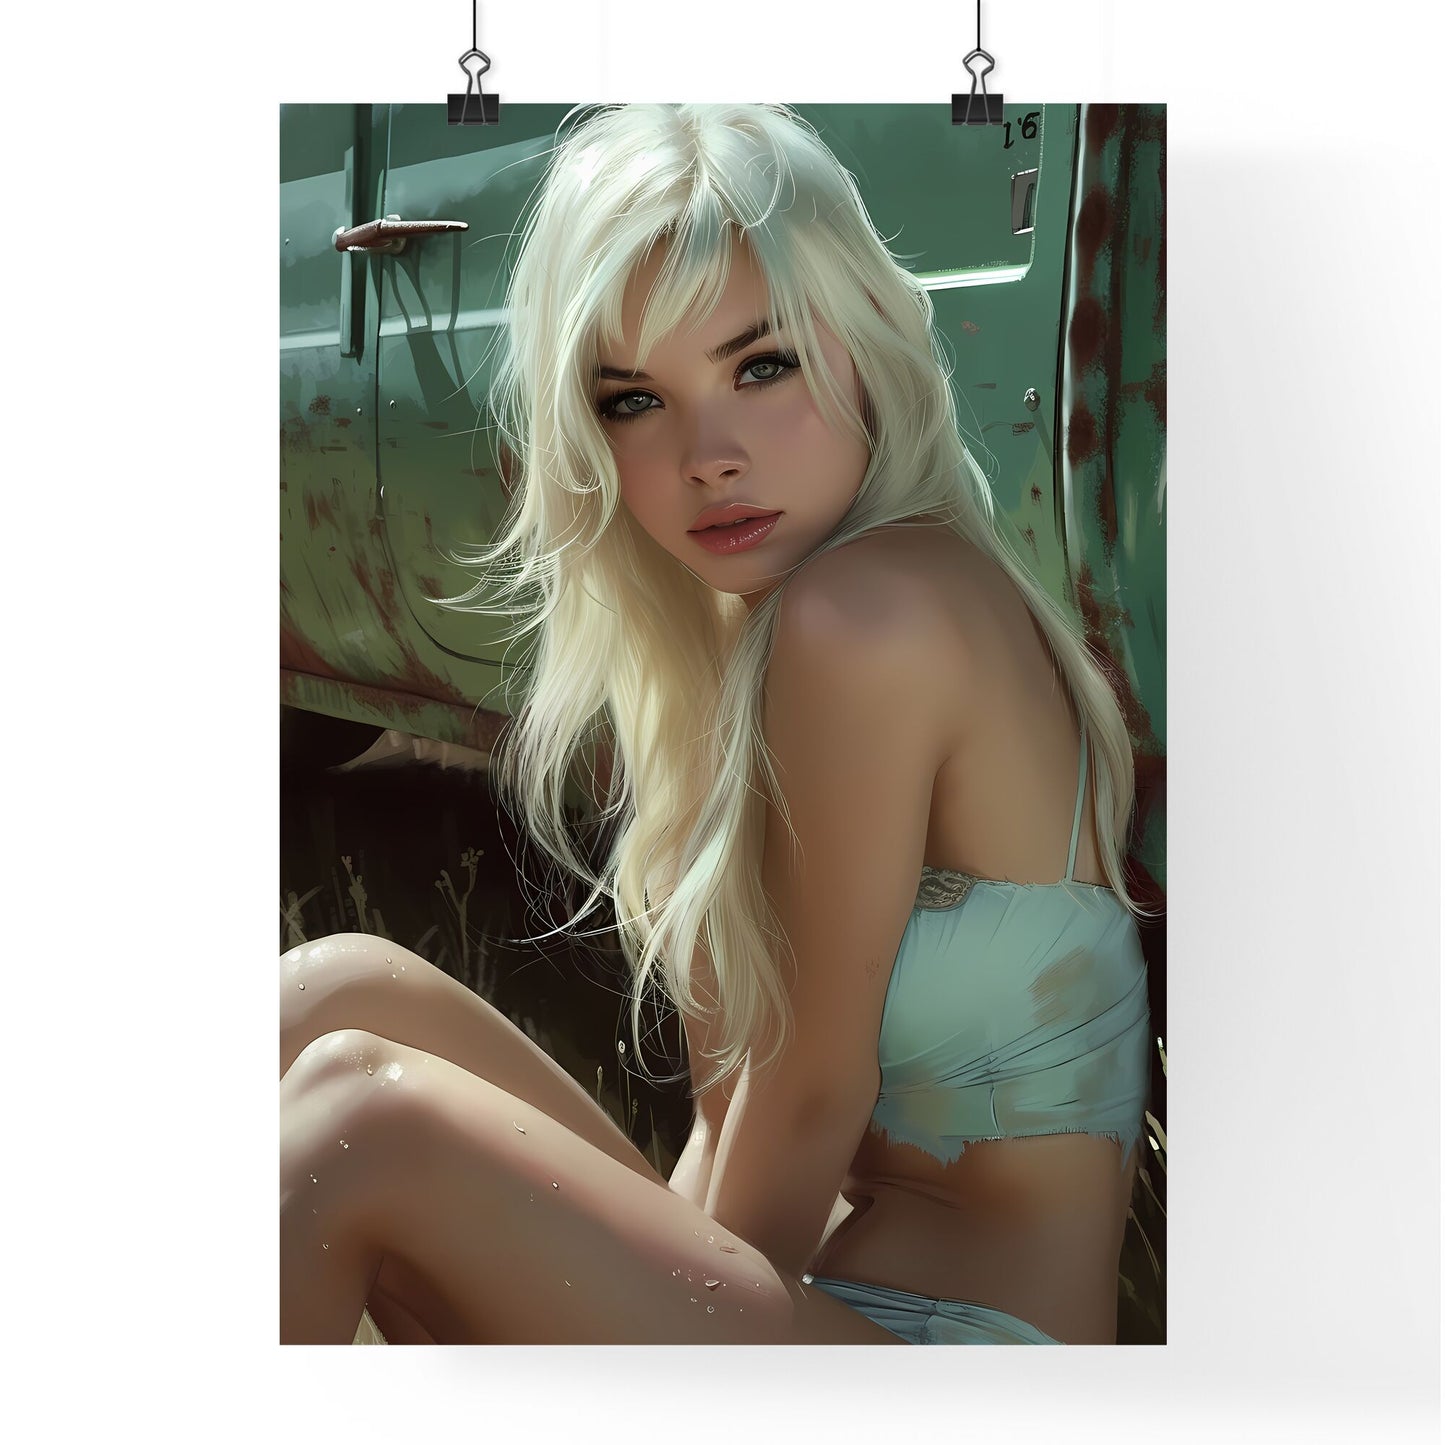 Sitting pin up factory worker girl,looking amazing - Art print of a woman sitting in a field Default Title